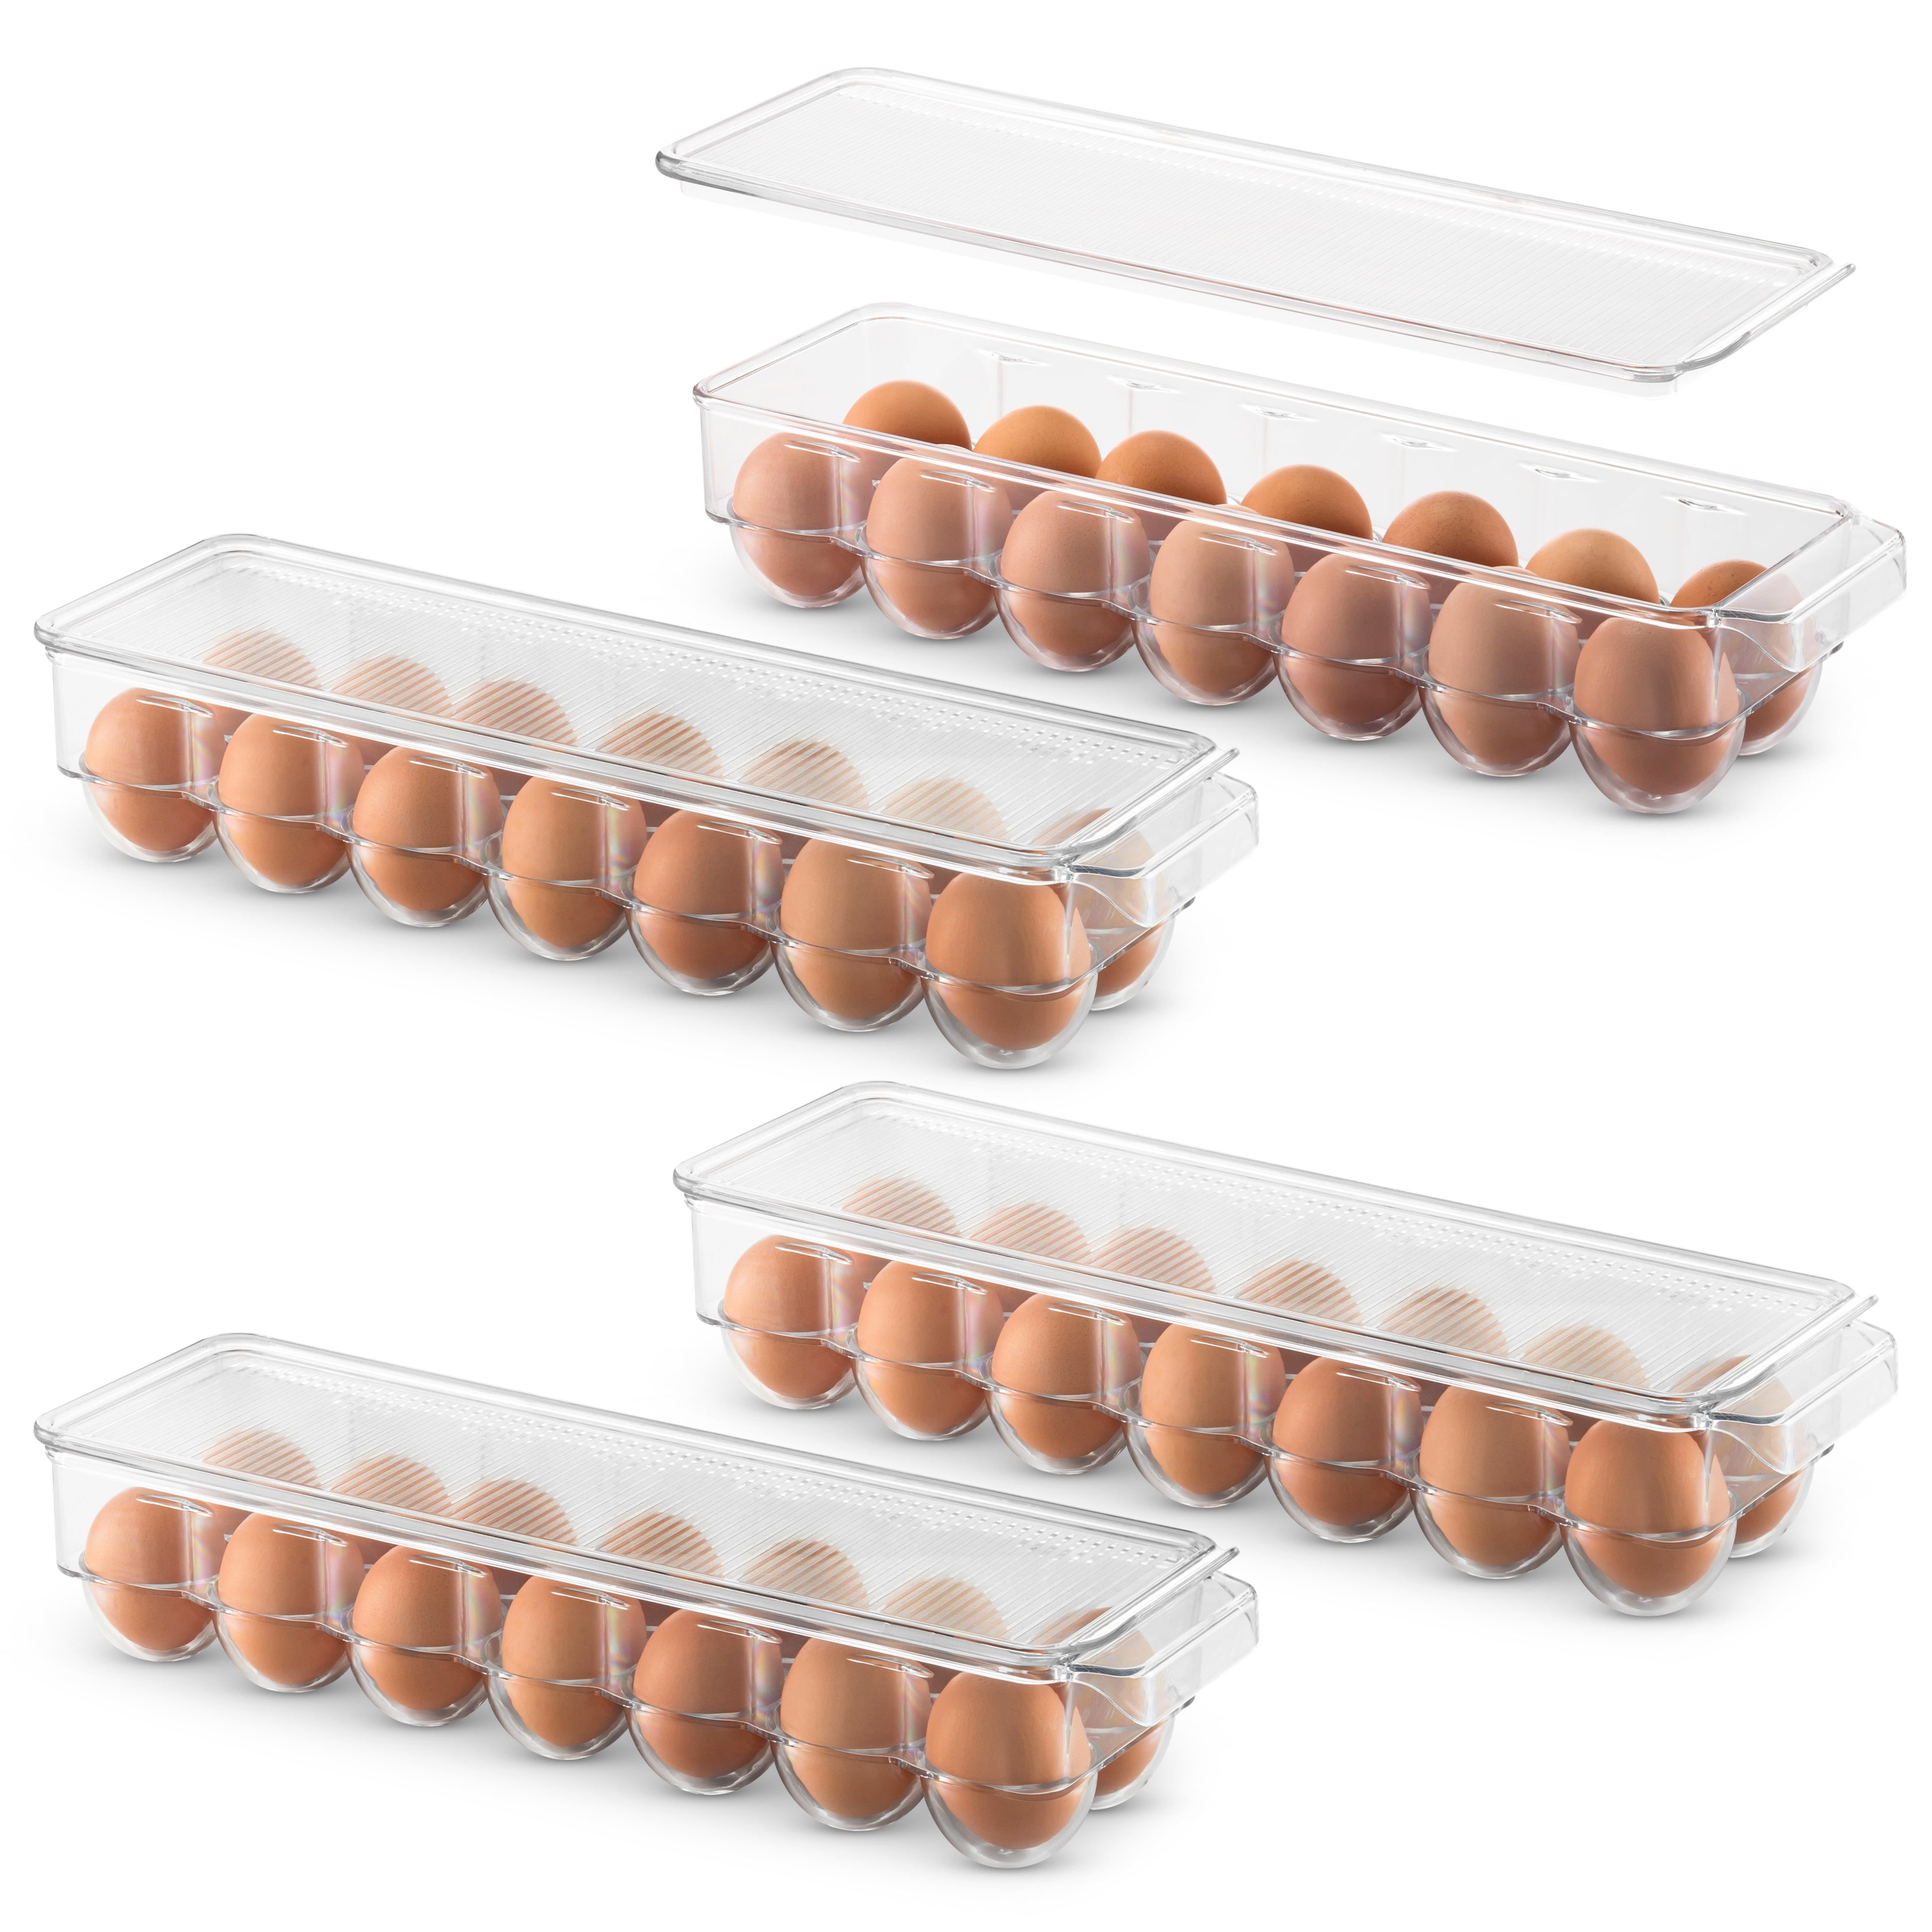 Clear Plastic Egg Trays for Kitchen Fit 14 Eggs Hanobe Egg Holder For Refrigerator Pull Out Bins Fridge Organizer Drawer Stackable Auto Scrolling Egg Storage Container with Lid 